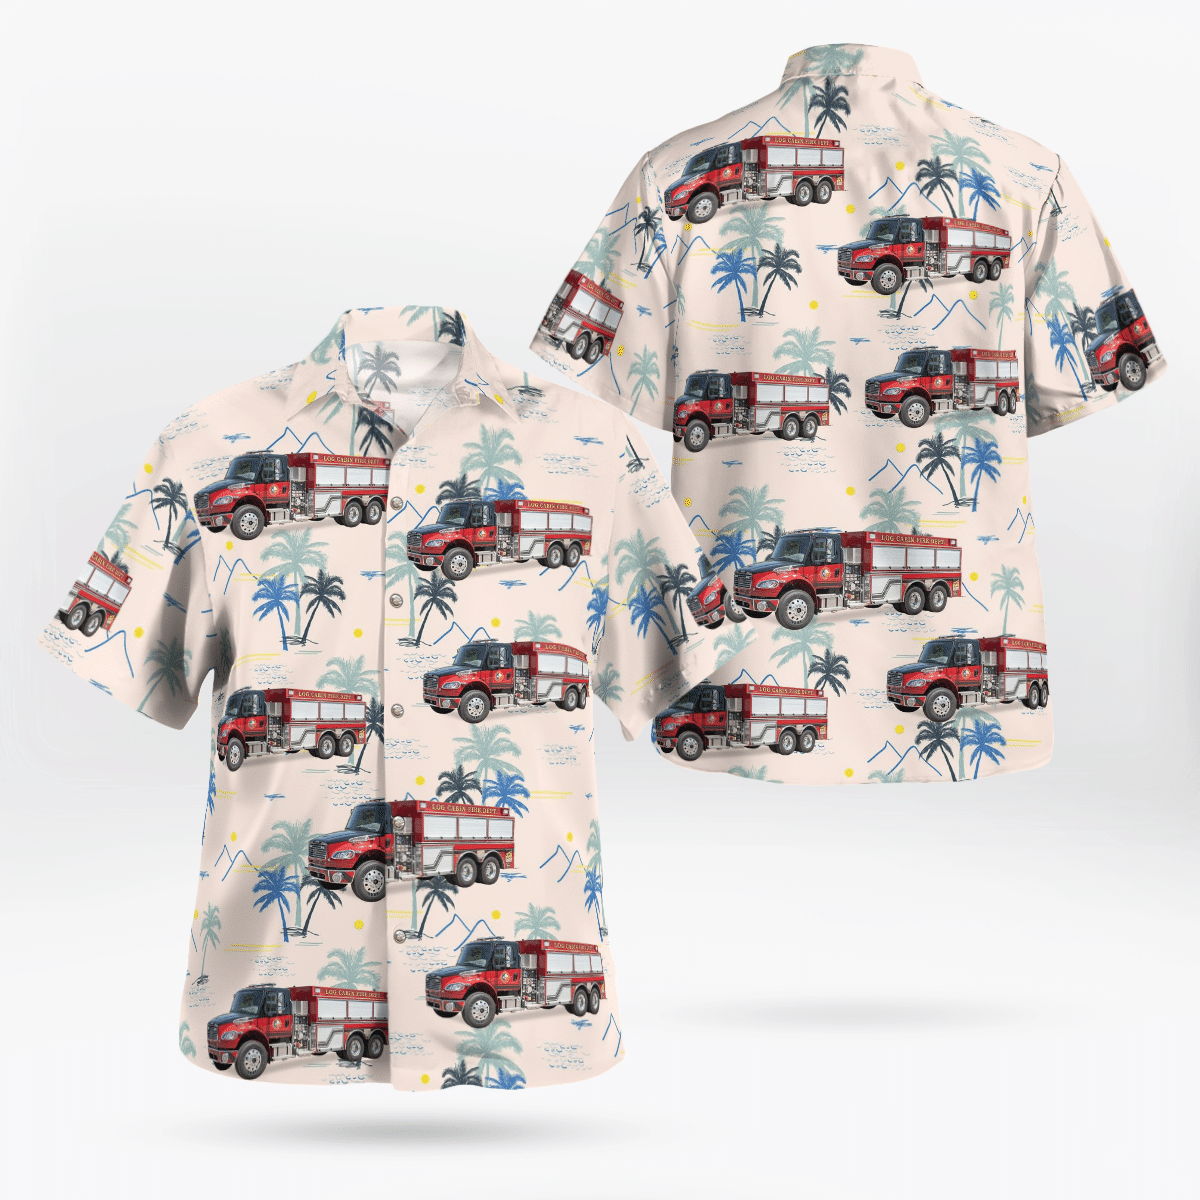 Shop now to find the perfect Hawaii Shirt for your hobby 67